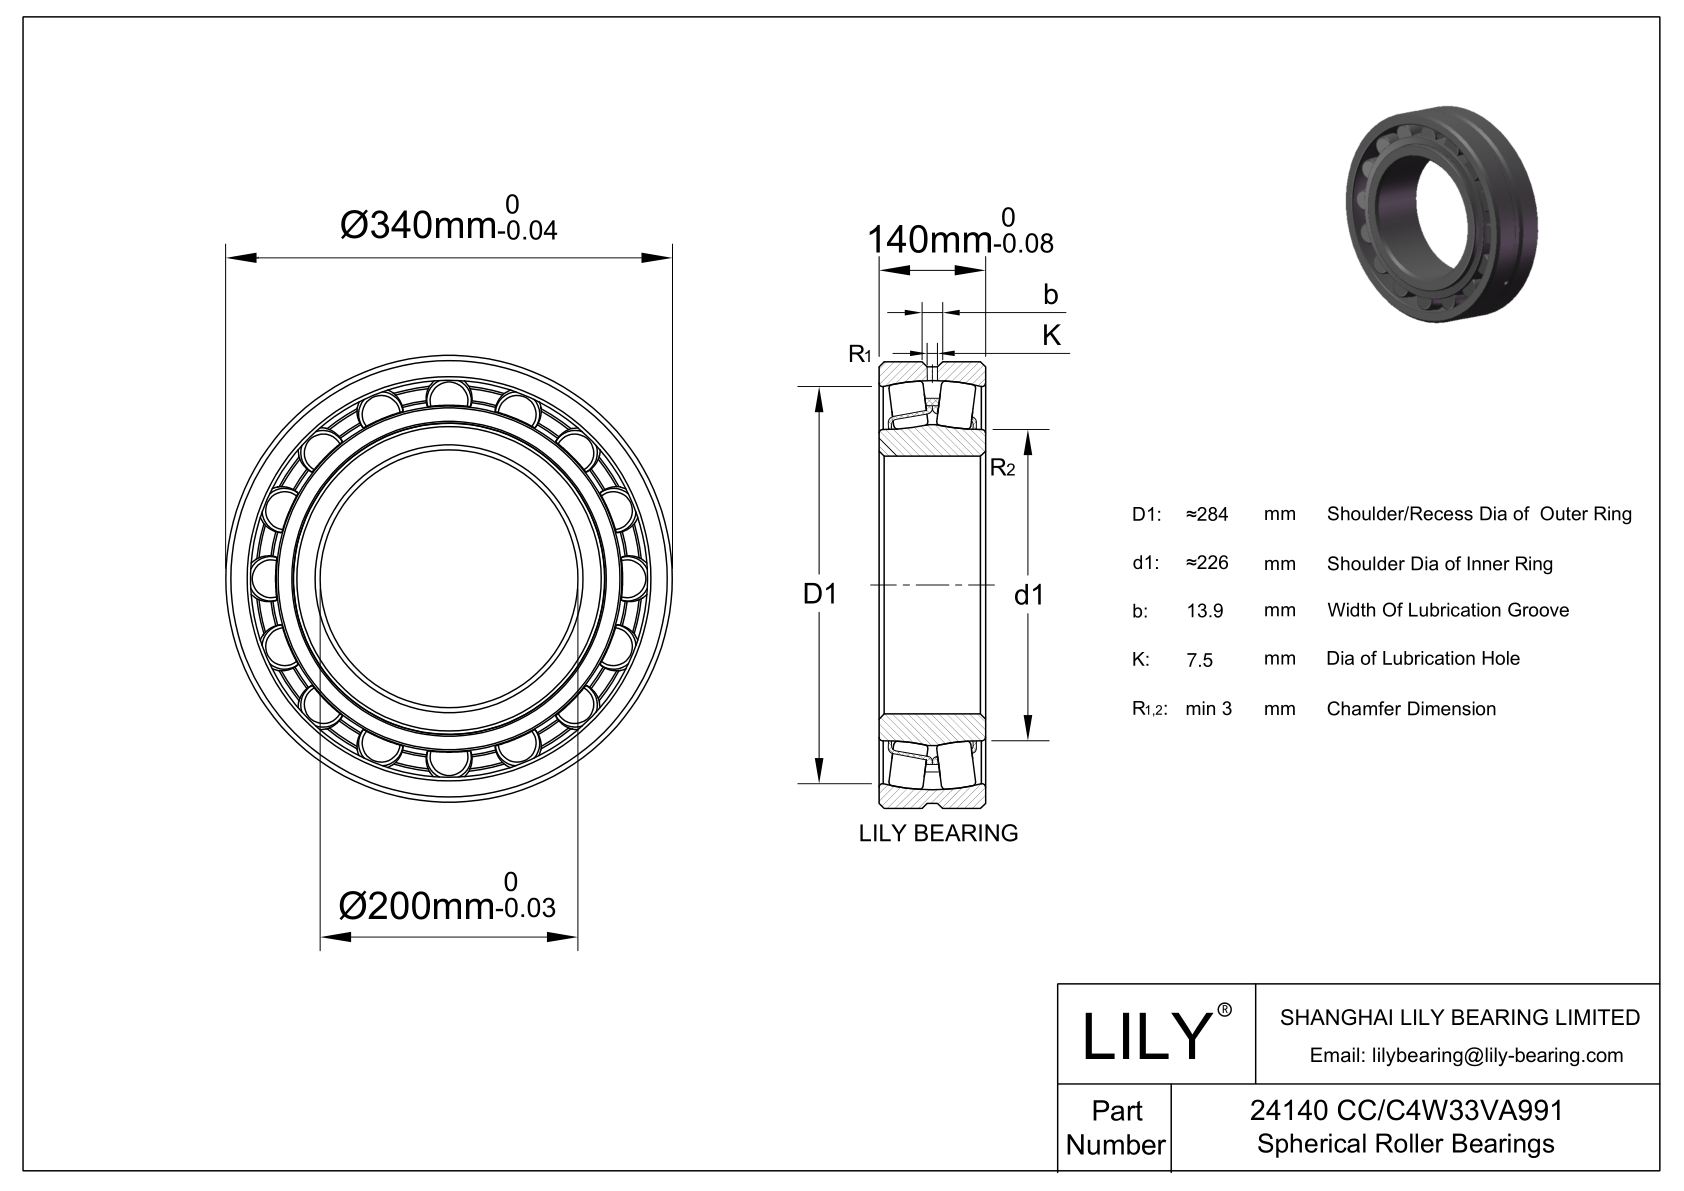 24140 CC/C4W33VA991 Double Row Spherical Roller Bearing cad drawing